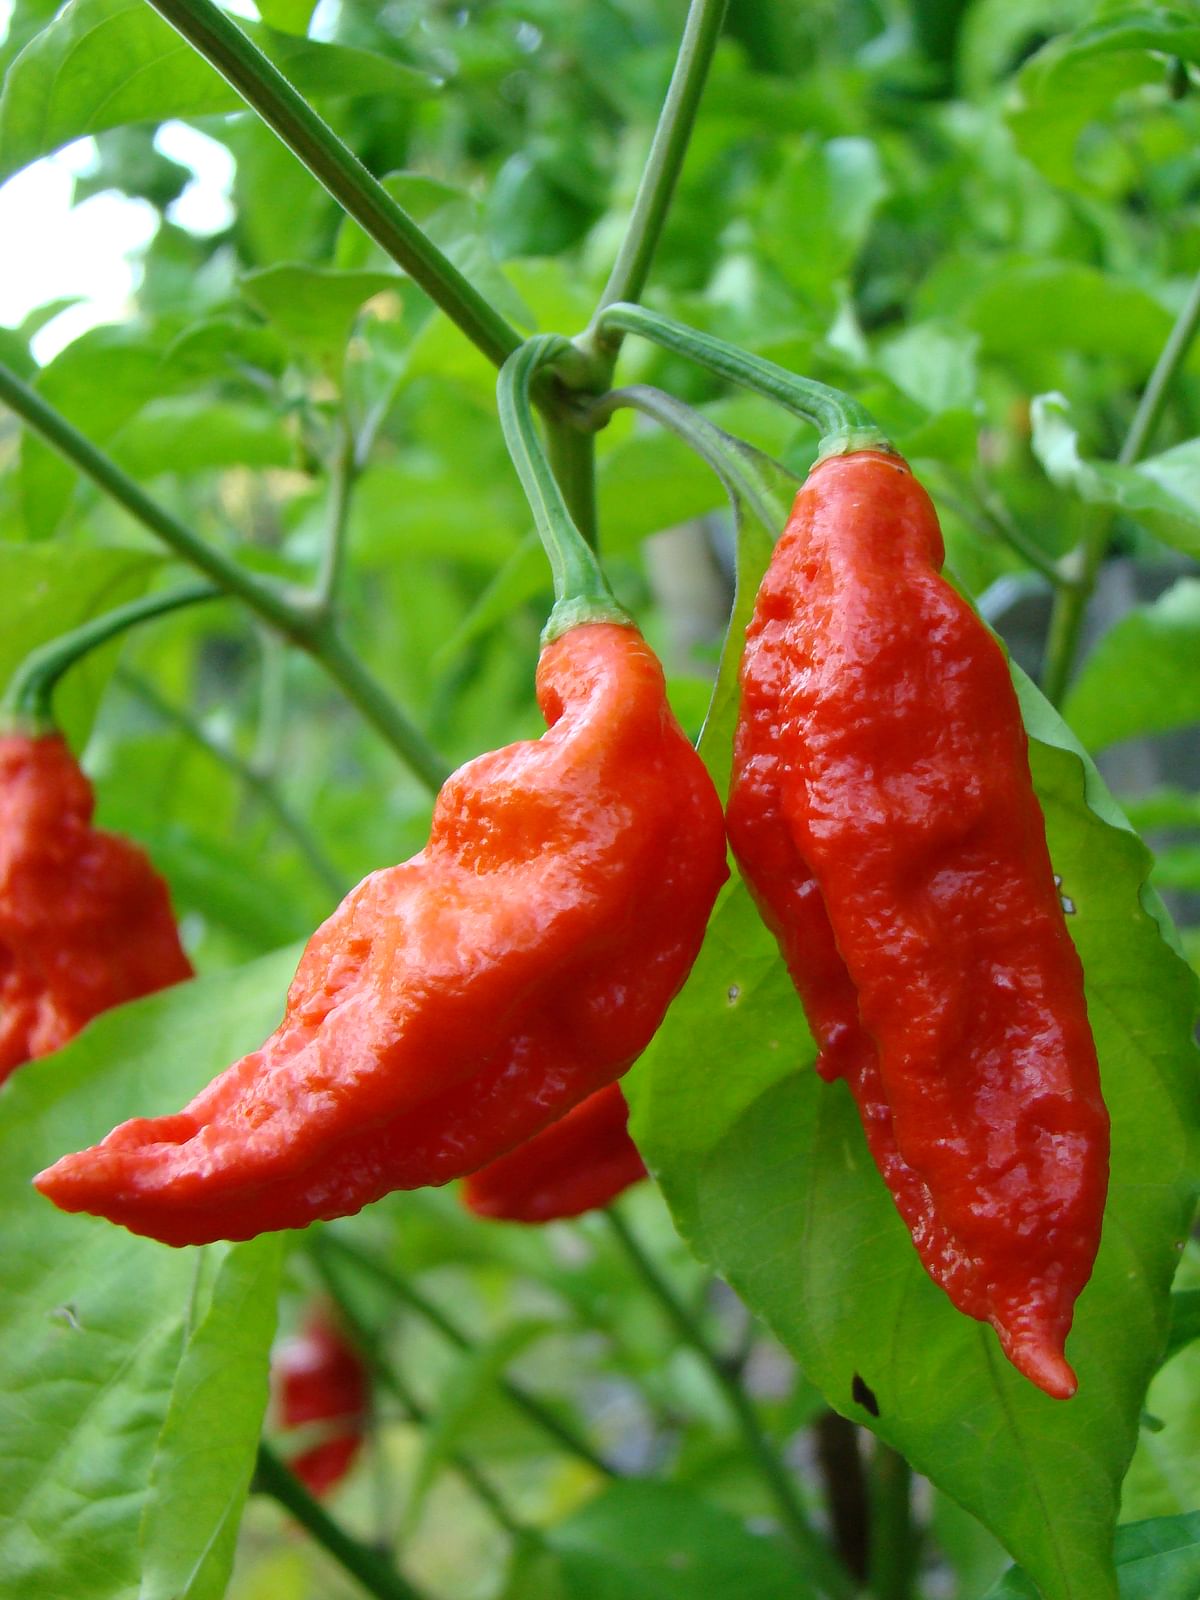 Chillies help cure indigestion, cut hyper acidity, and keep your cholesterol numbers in check.